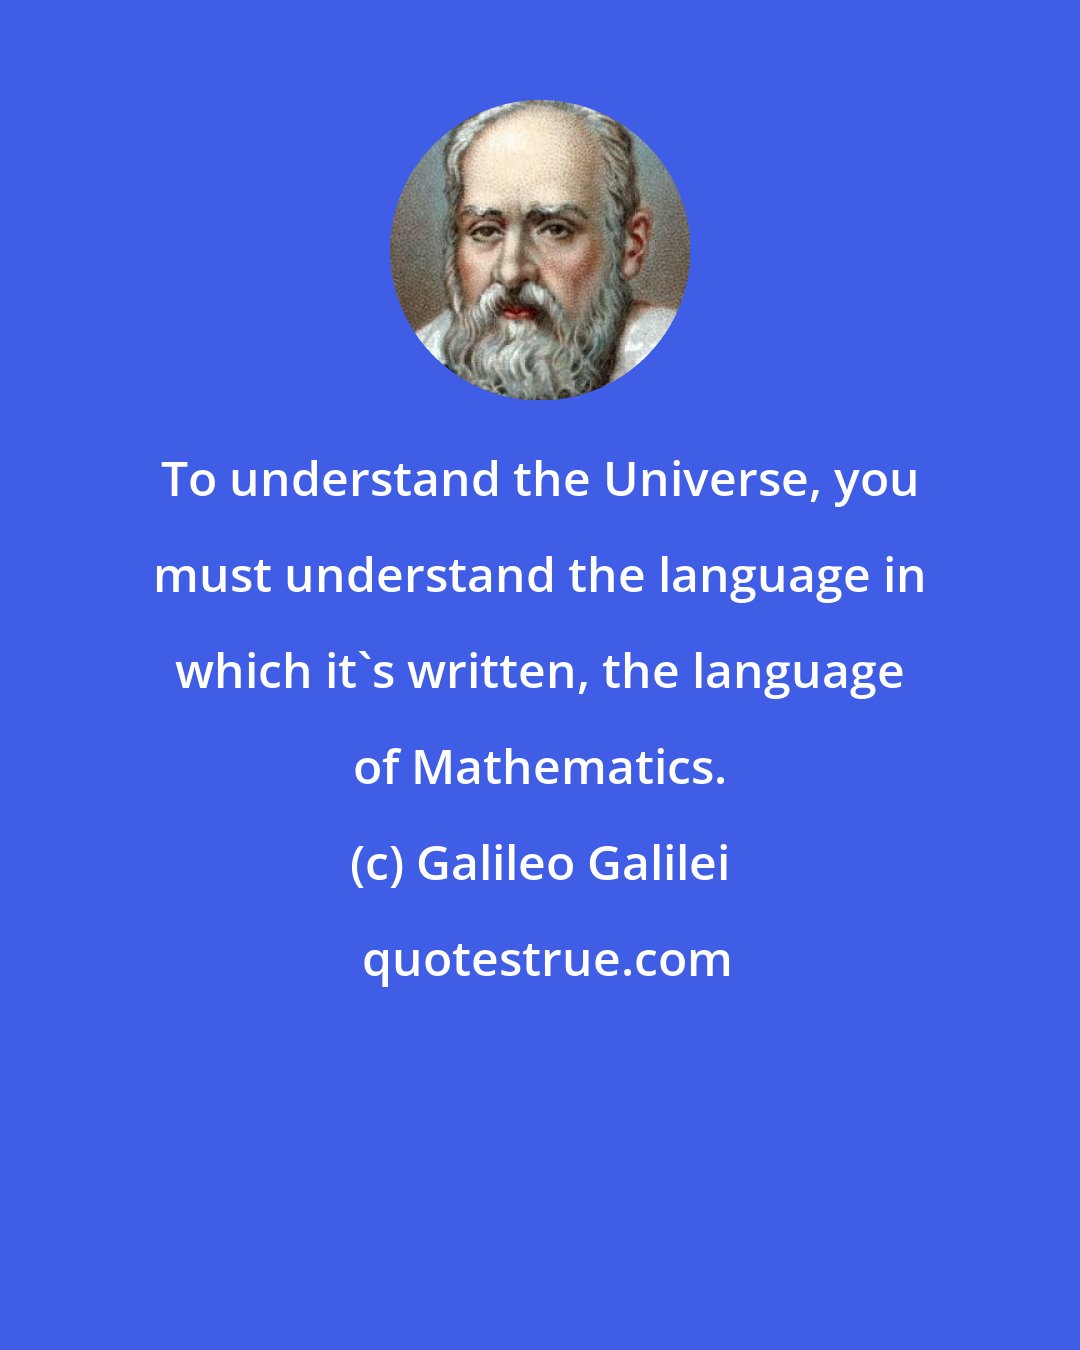 Galileo Galilei: To understand the Universe, you must understand the language in which it's written, the language of Mathematics.